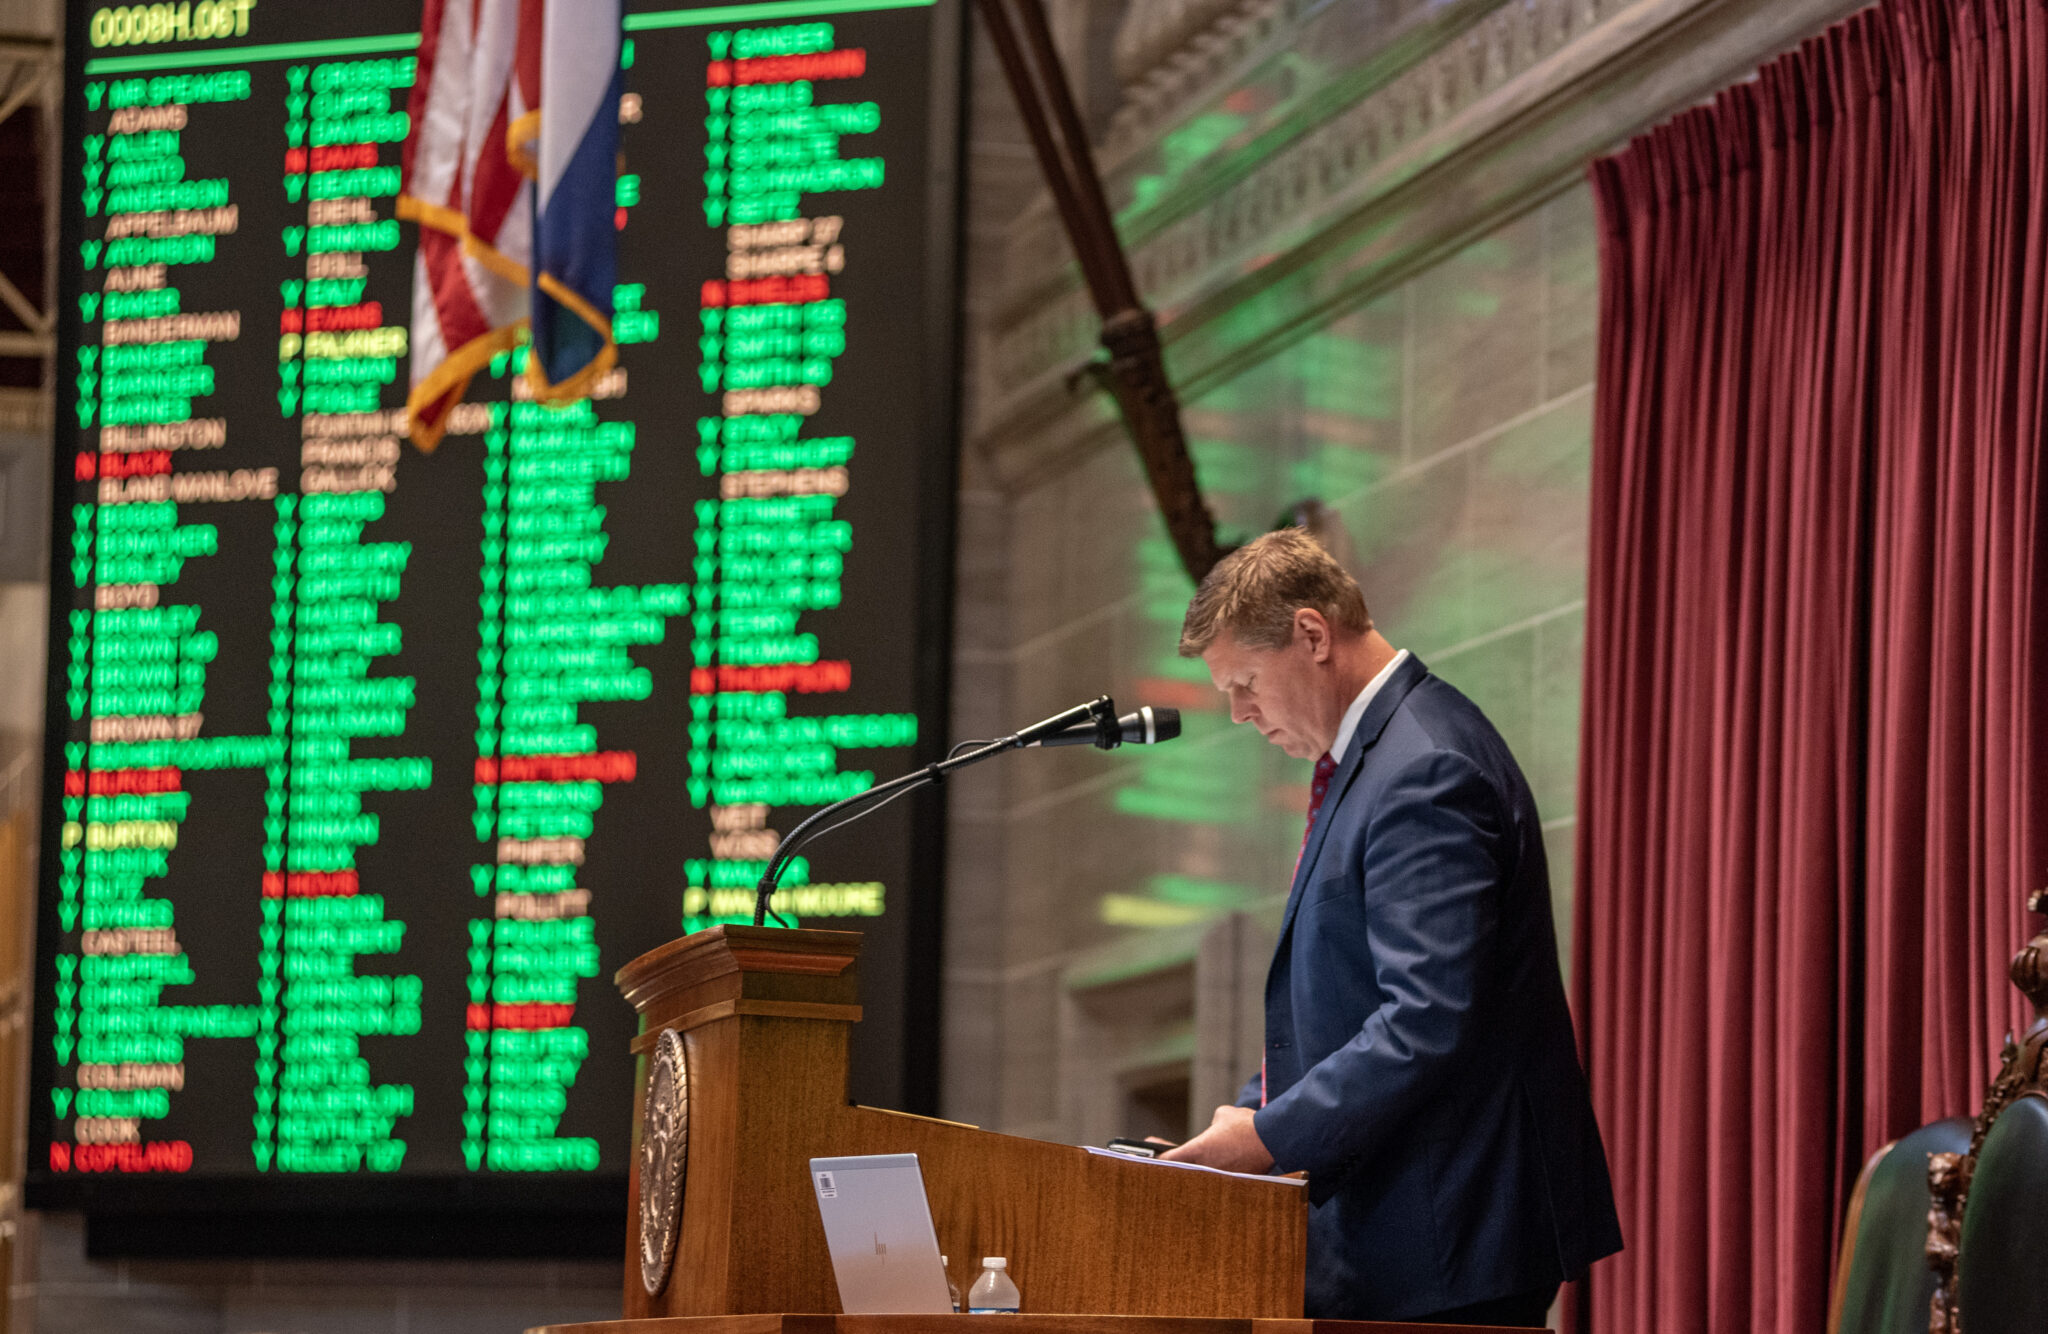 House Speaker Dean Plocher, R-Des Peres, waits for the Missouri House to finish voting on a motion during veto session Wednesday (Annelise Hanshaw/Missouri Independent).